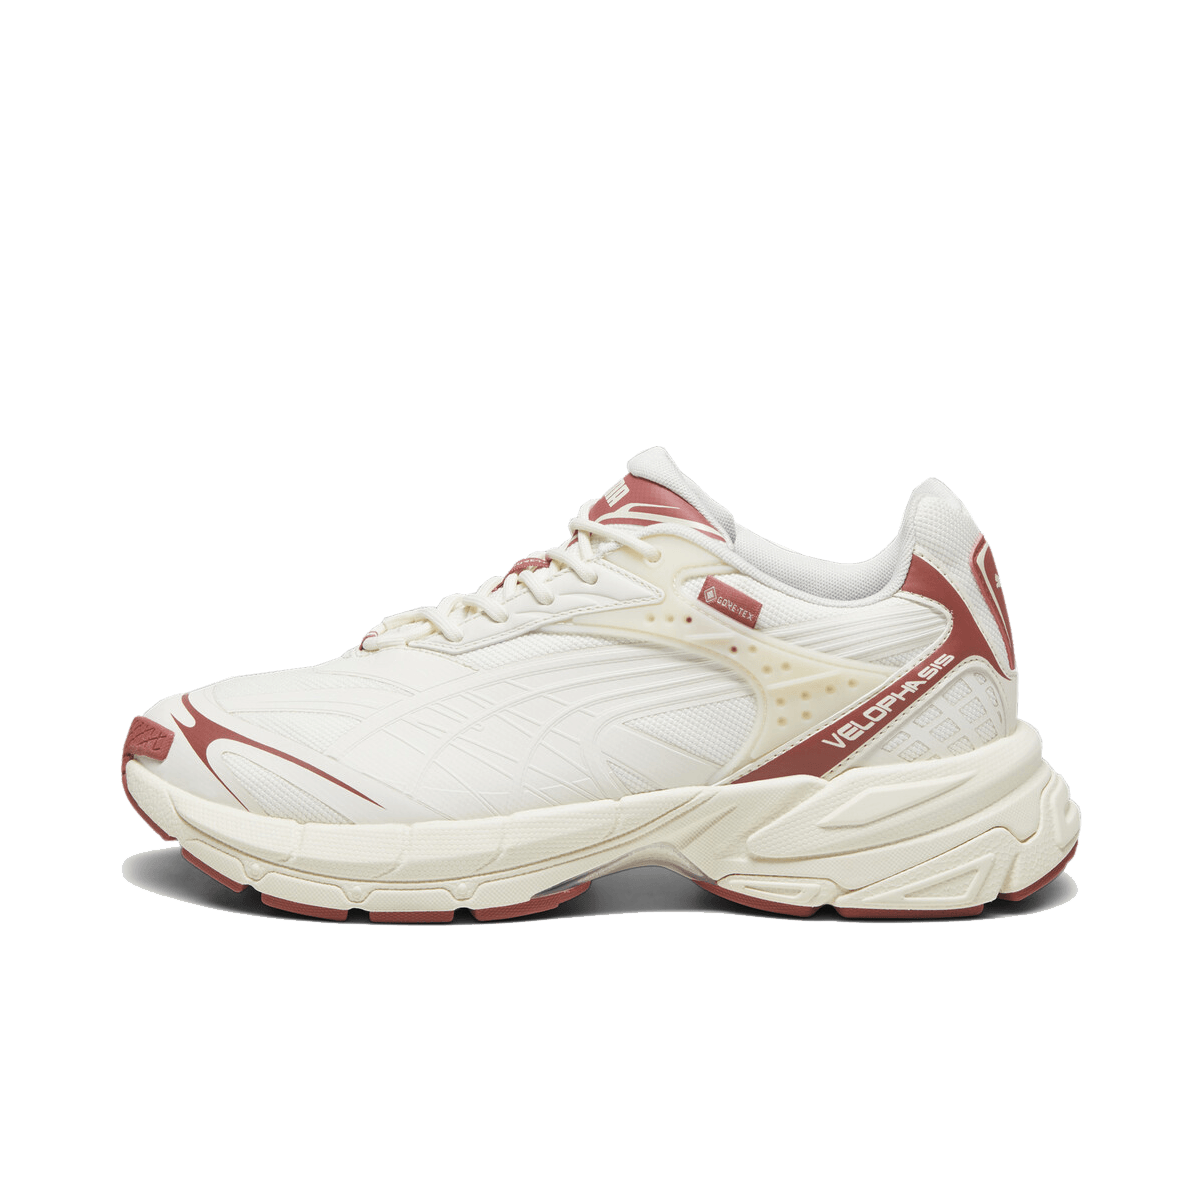 Puma Velophasis Gorp GTX 'Frosted Ivory' 392531-01